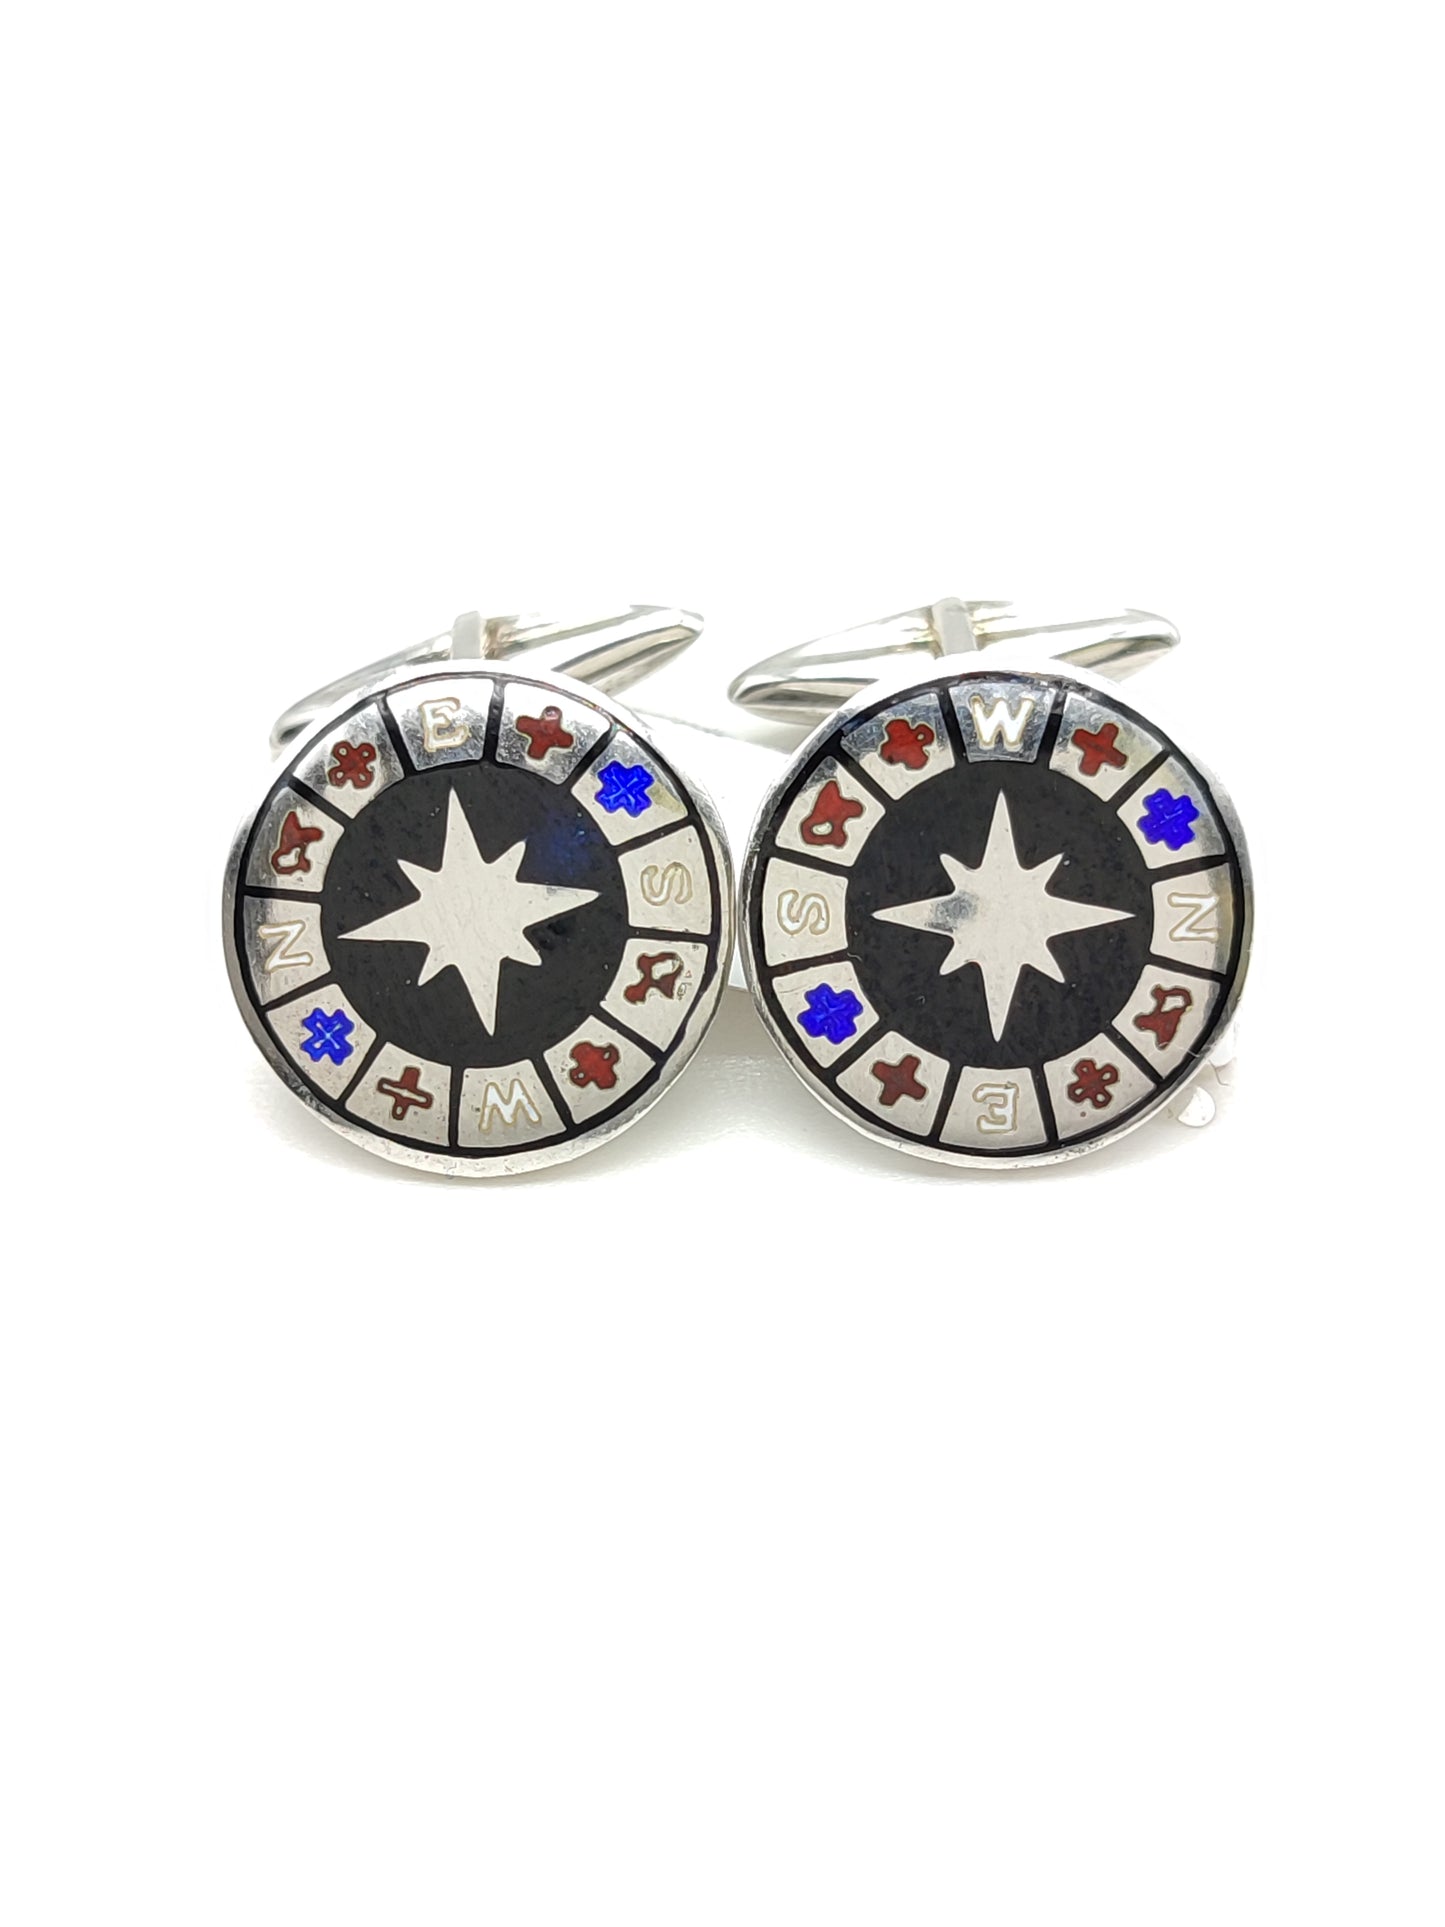 Cufflinks with enamelled compass rose